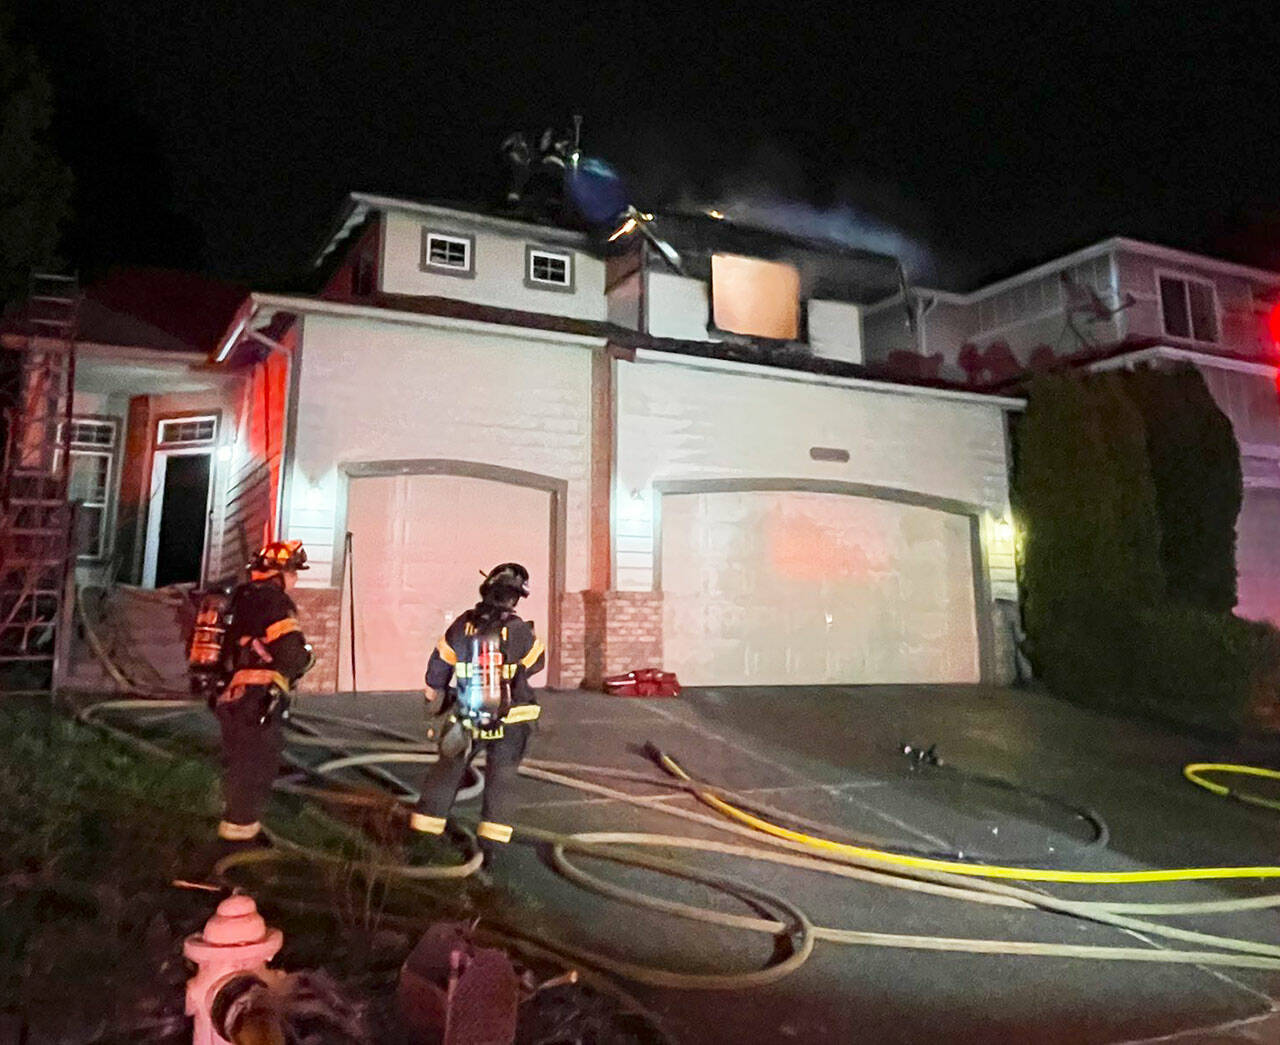 Firefighters respond to a March 19 fire at a home on the East Hill in Kent. COURTESY PHOTO, Puget Sound Fire